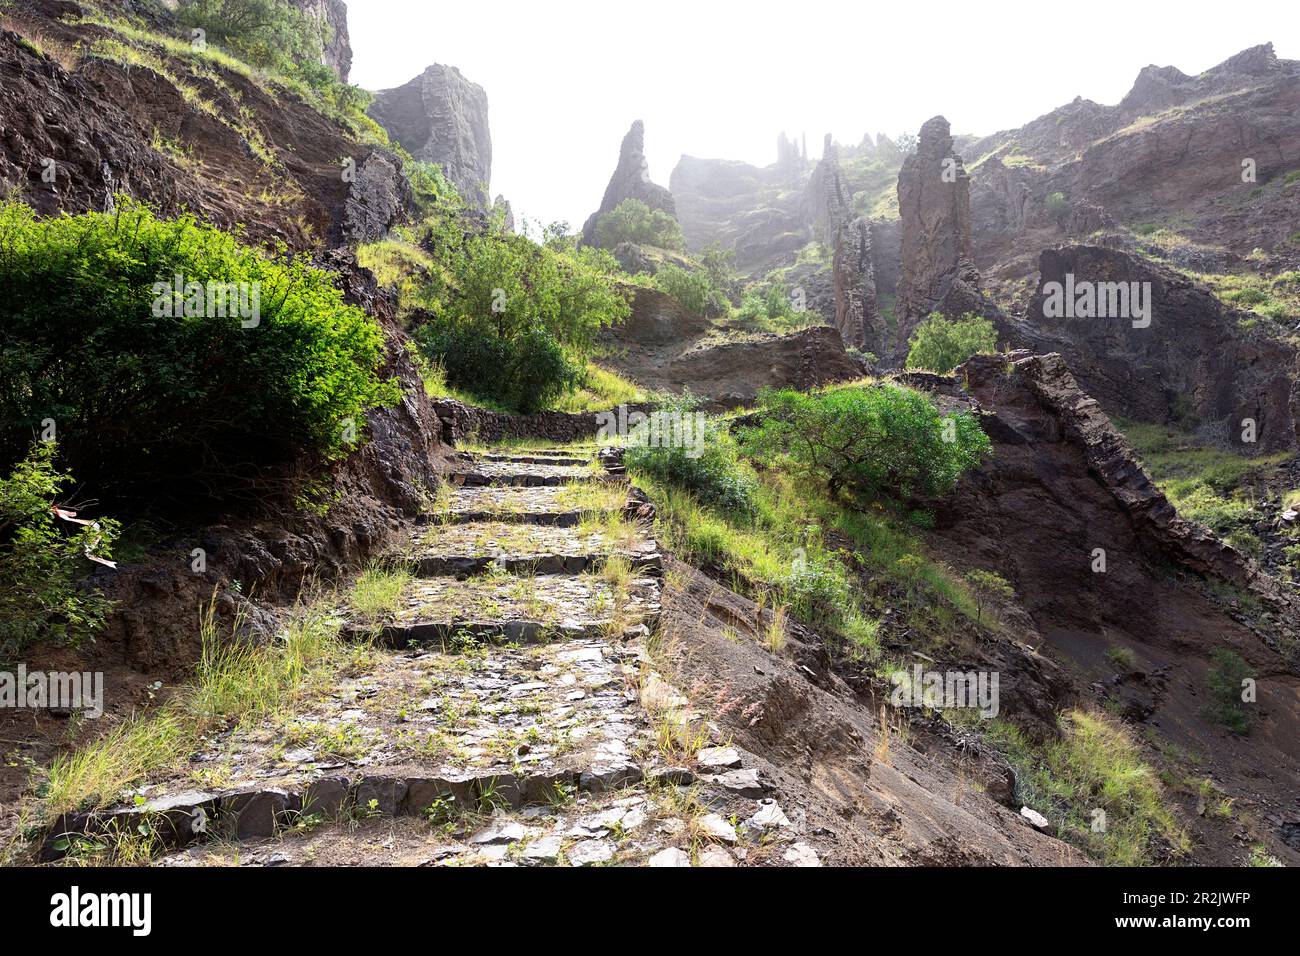 Spectacular hiking trail to Cha de Morte village on Santo Antao island, Cabo verde, africa Stock Photo